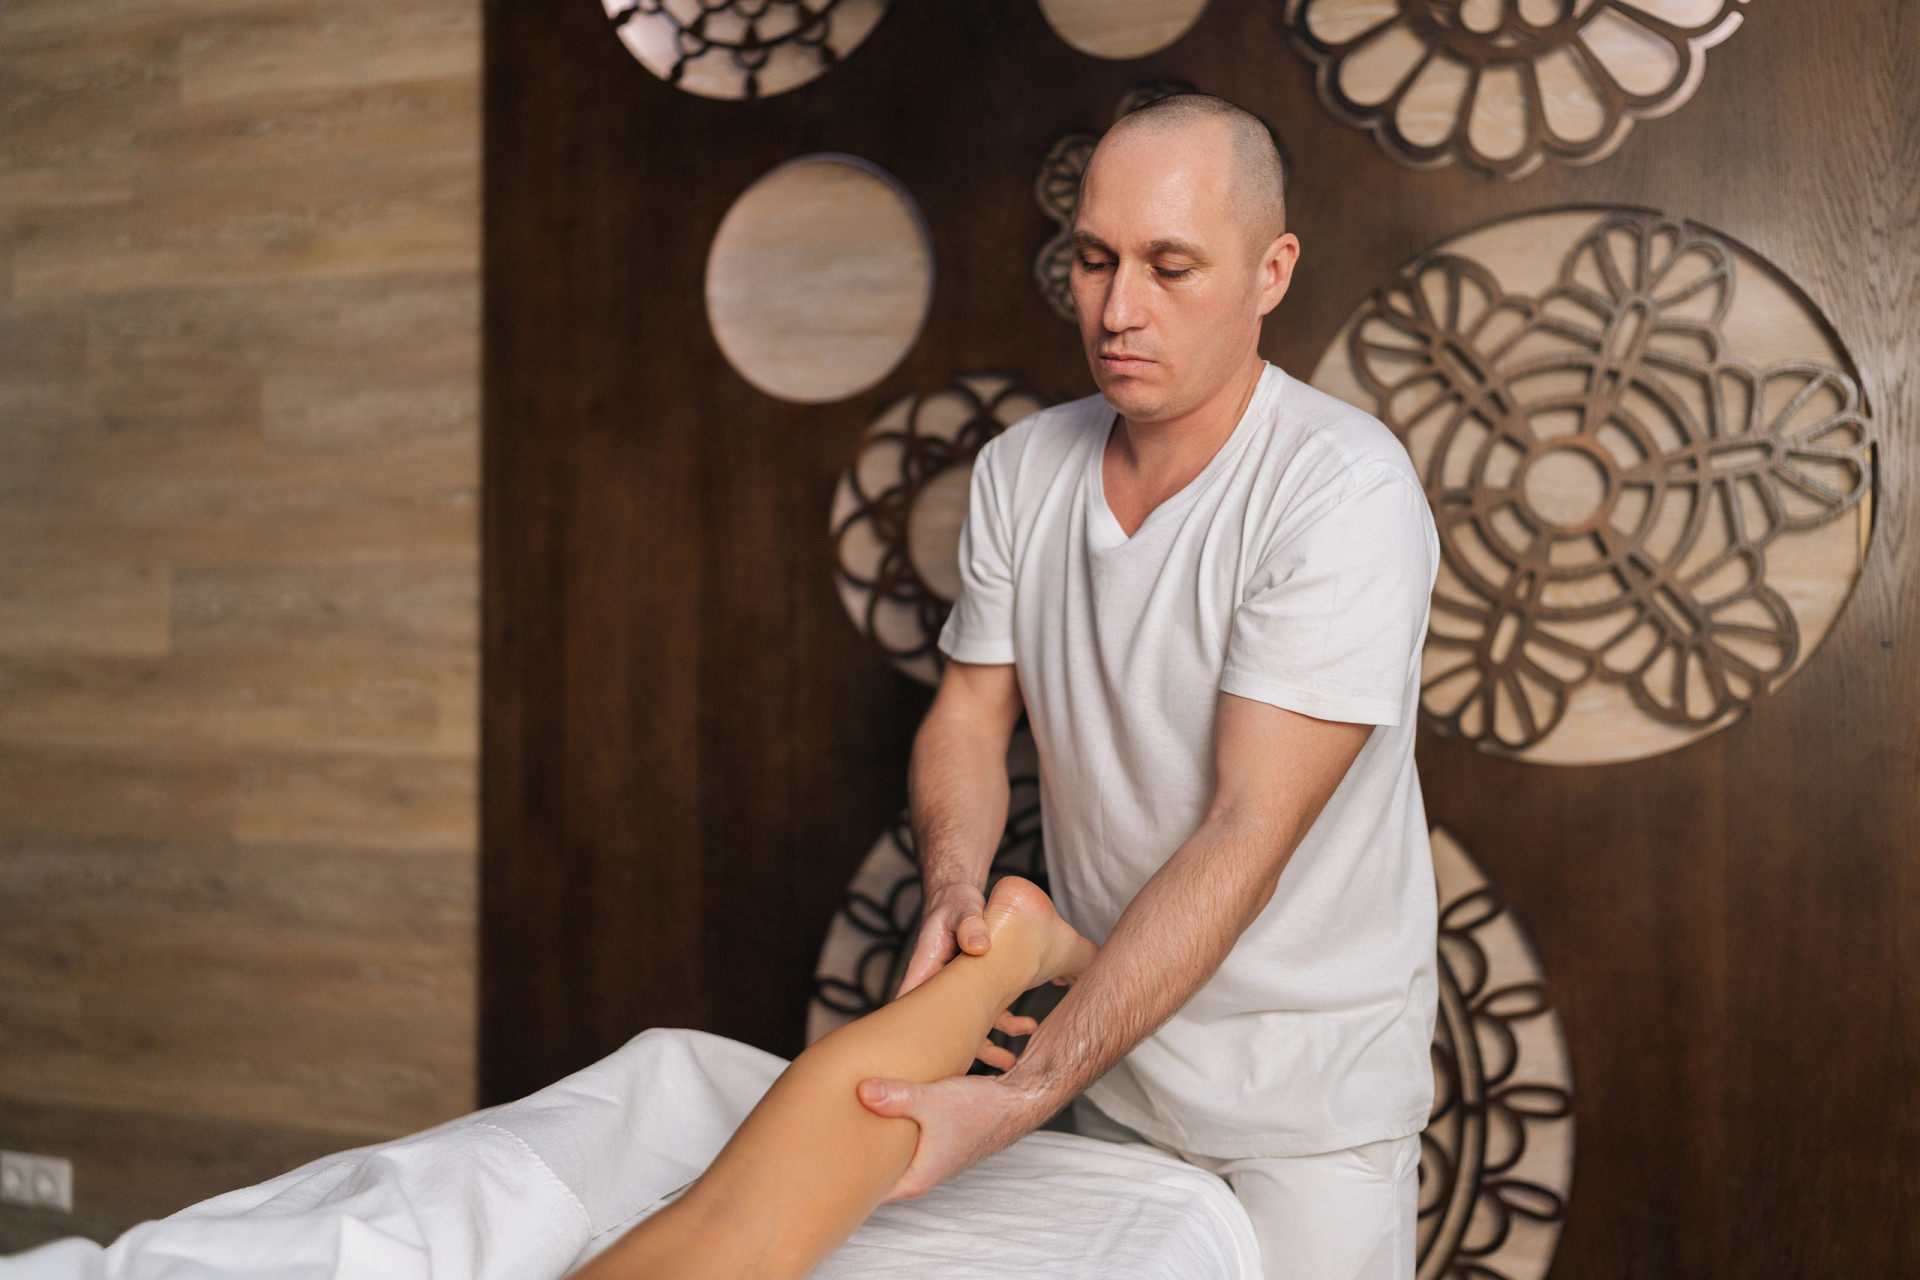 <p>While more research is needed into these theories, reflexology can still be suggested as a treatment in addition to conventional medical care. However, it shouldn't be used in place of conventional treatments.</p>